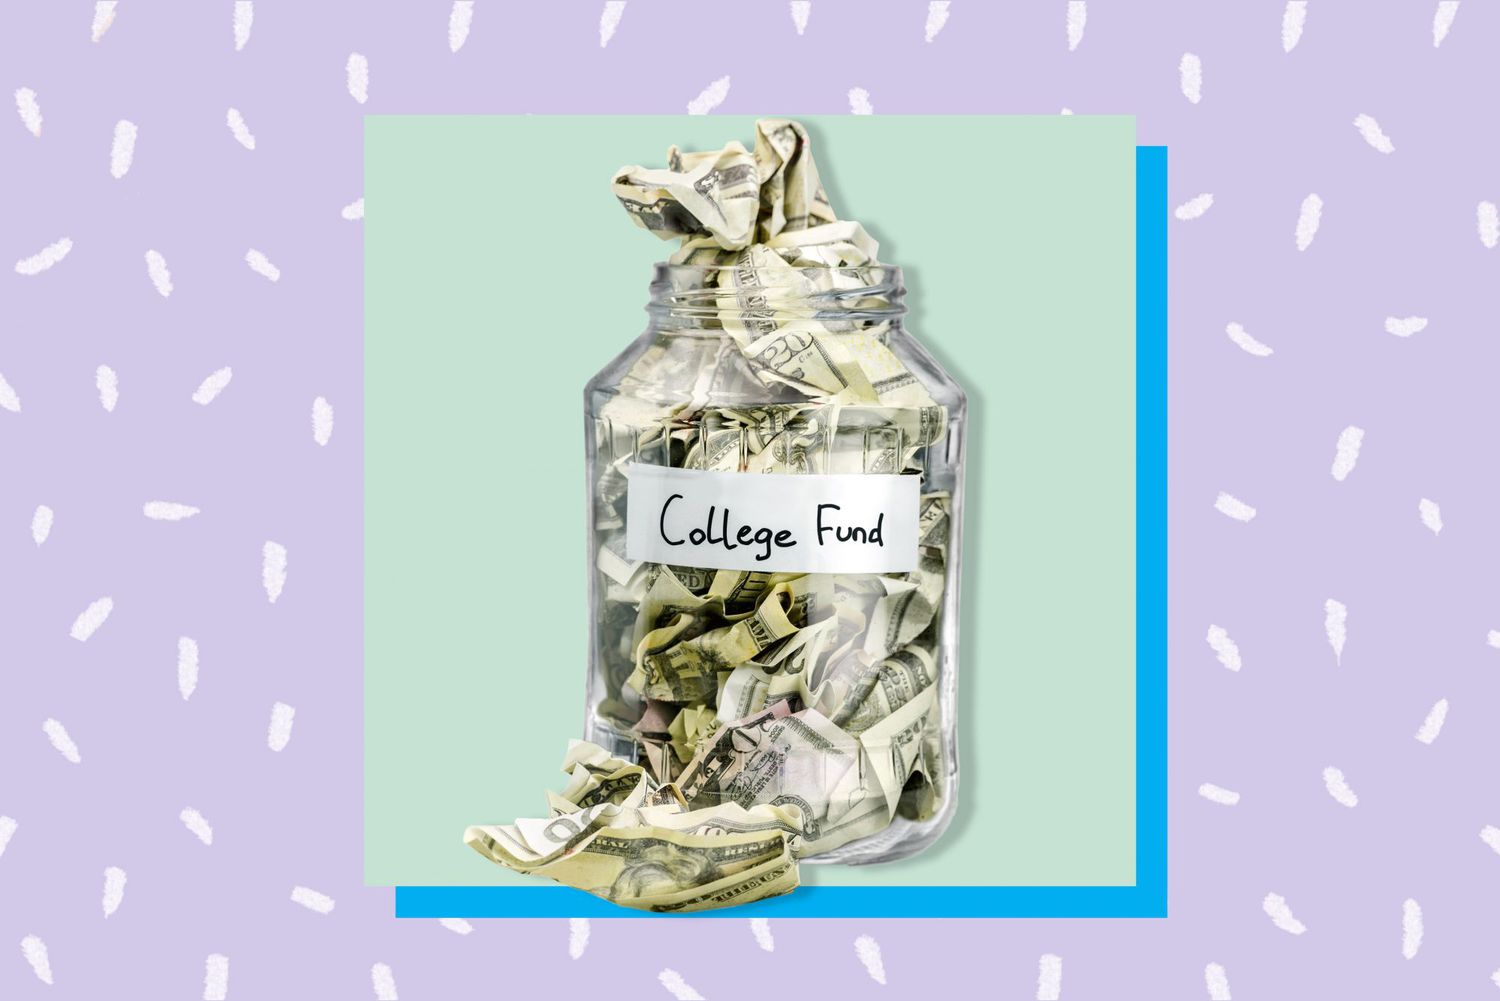 An image of a jar with money in it on a colorful background.